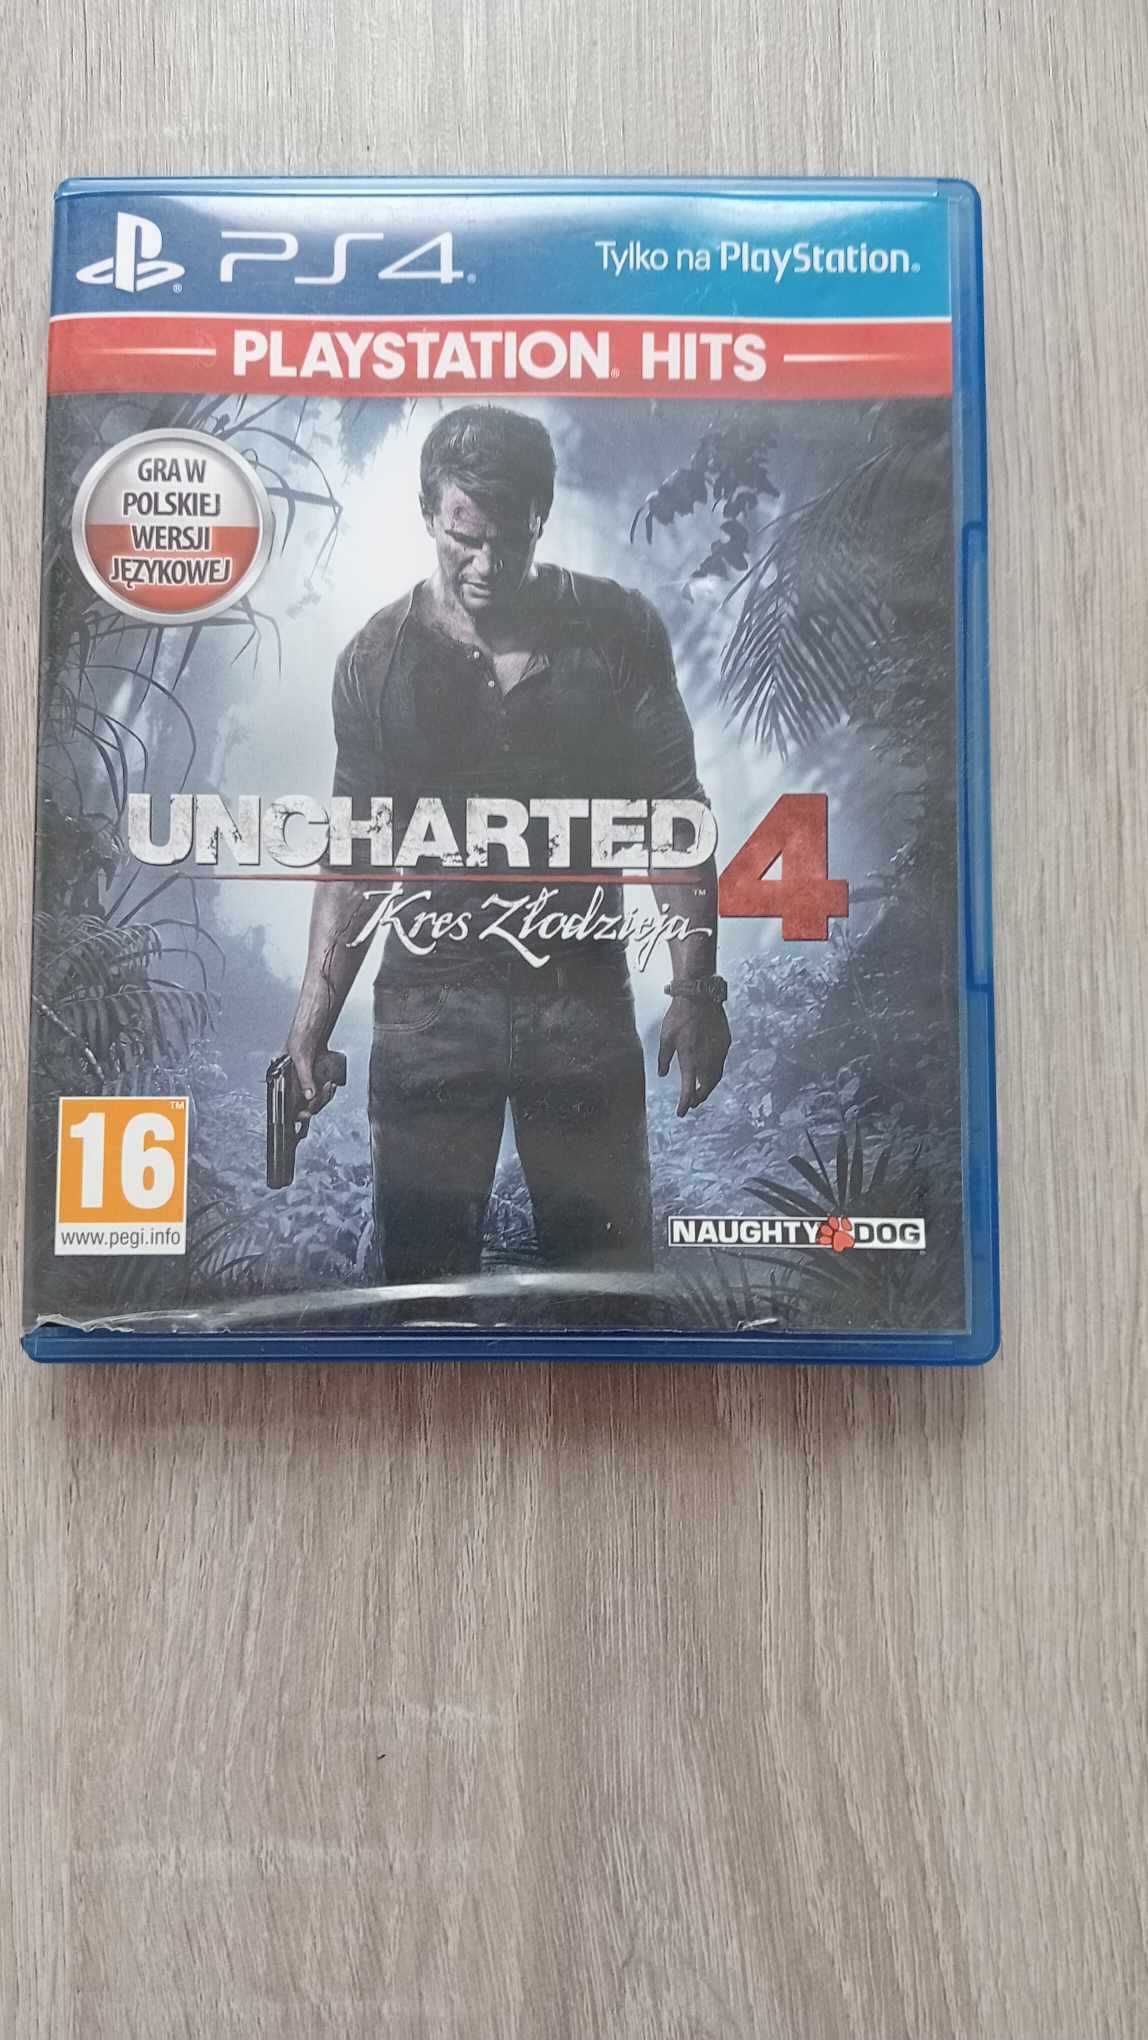 Gra uncharted 4 do ps4